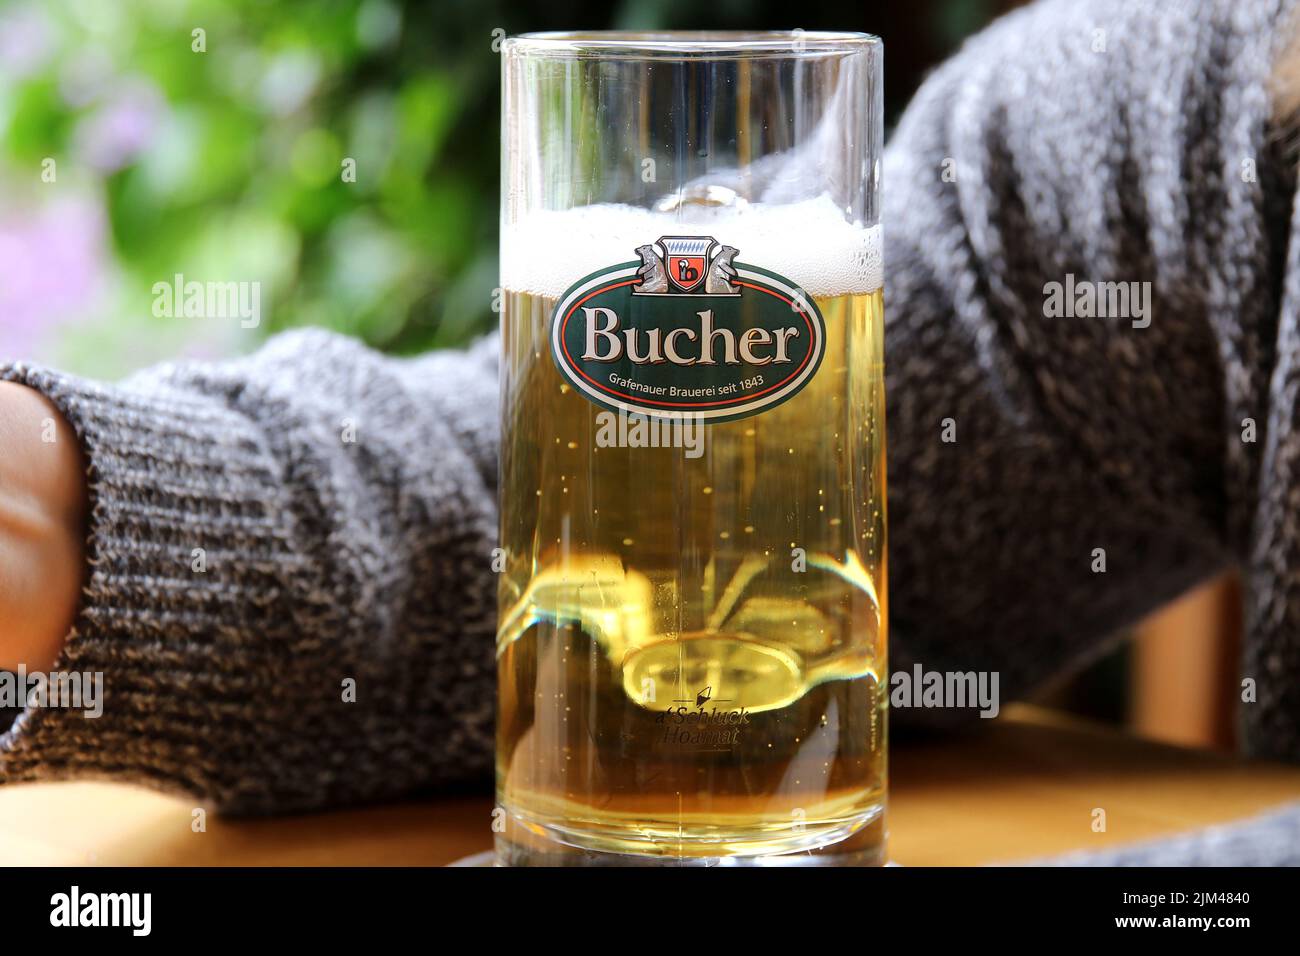 bucher is a beer brand from grafenau in bavariaa person's arm can be seen in the background Stock Photo